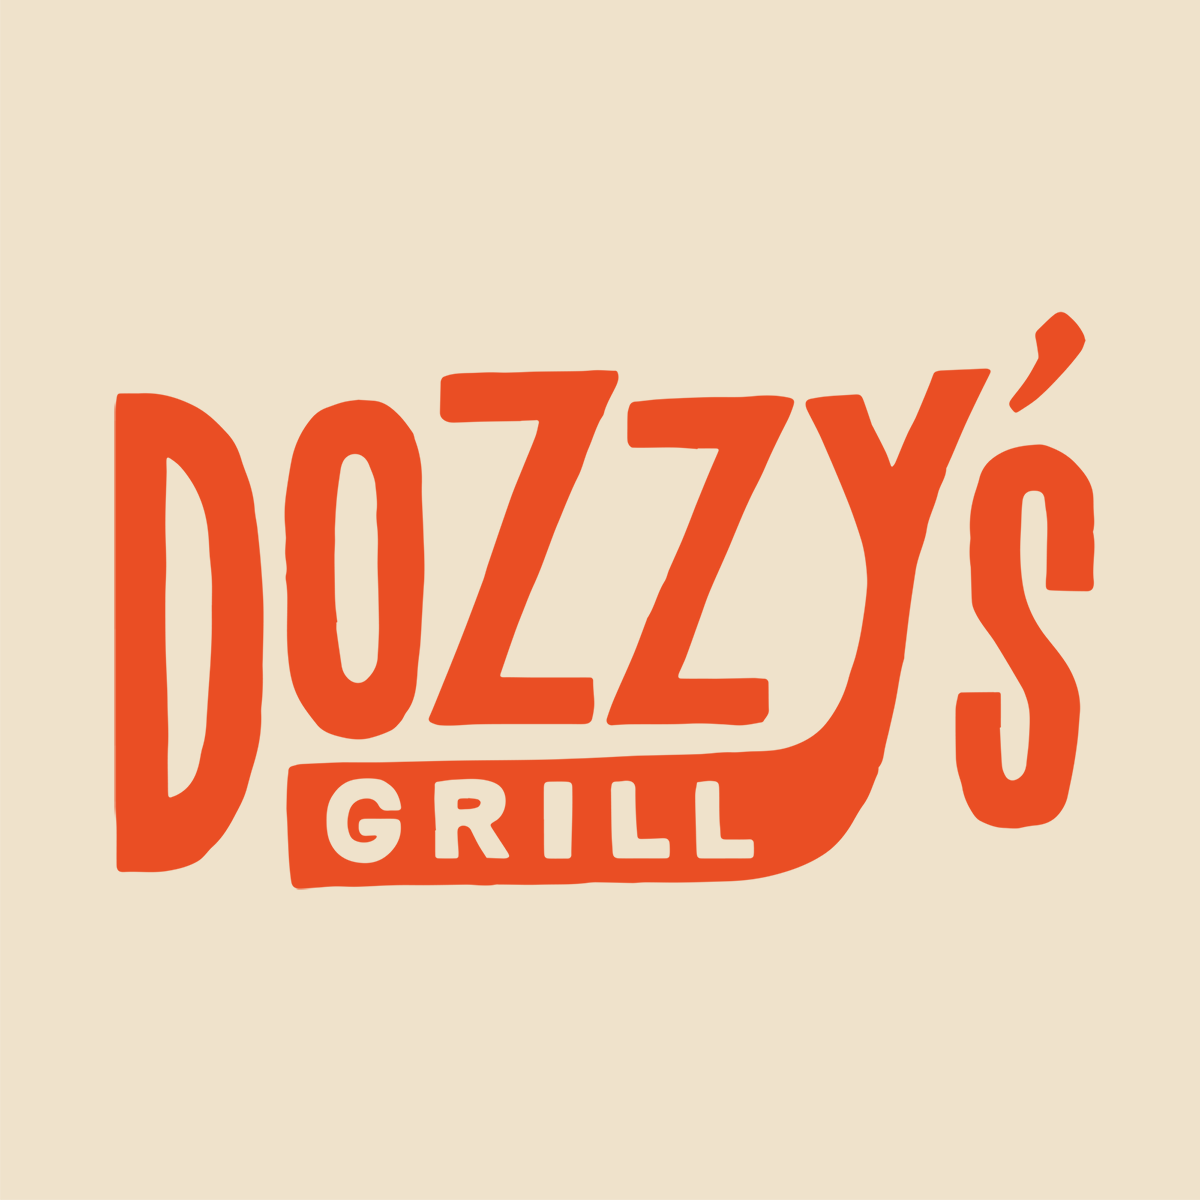 Dozzy's Grill